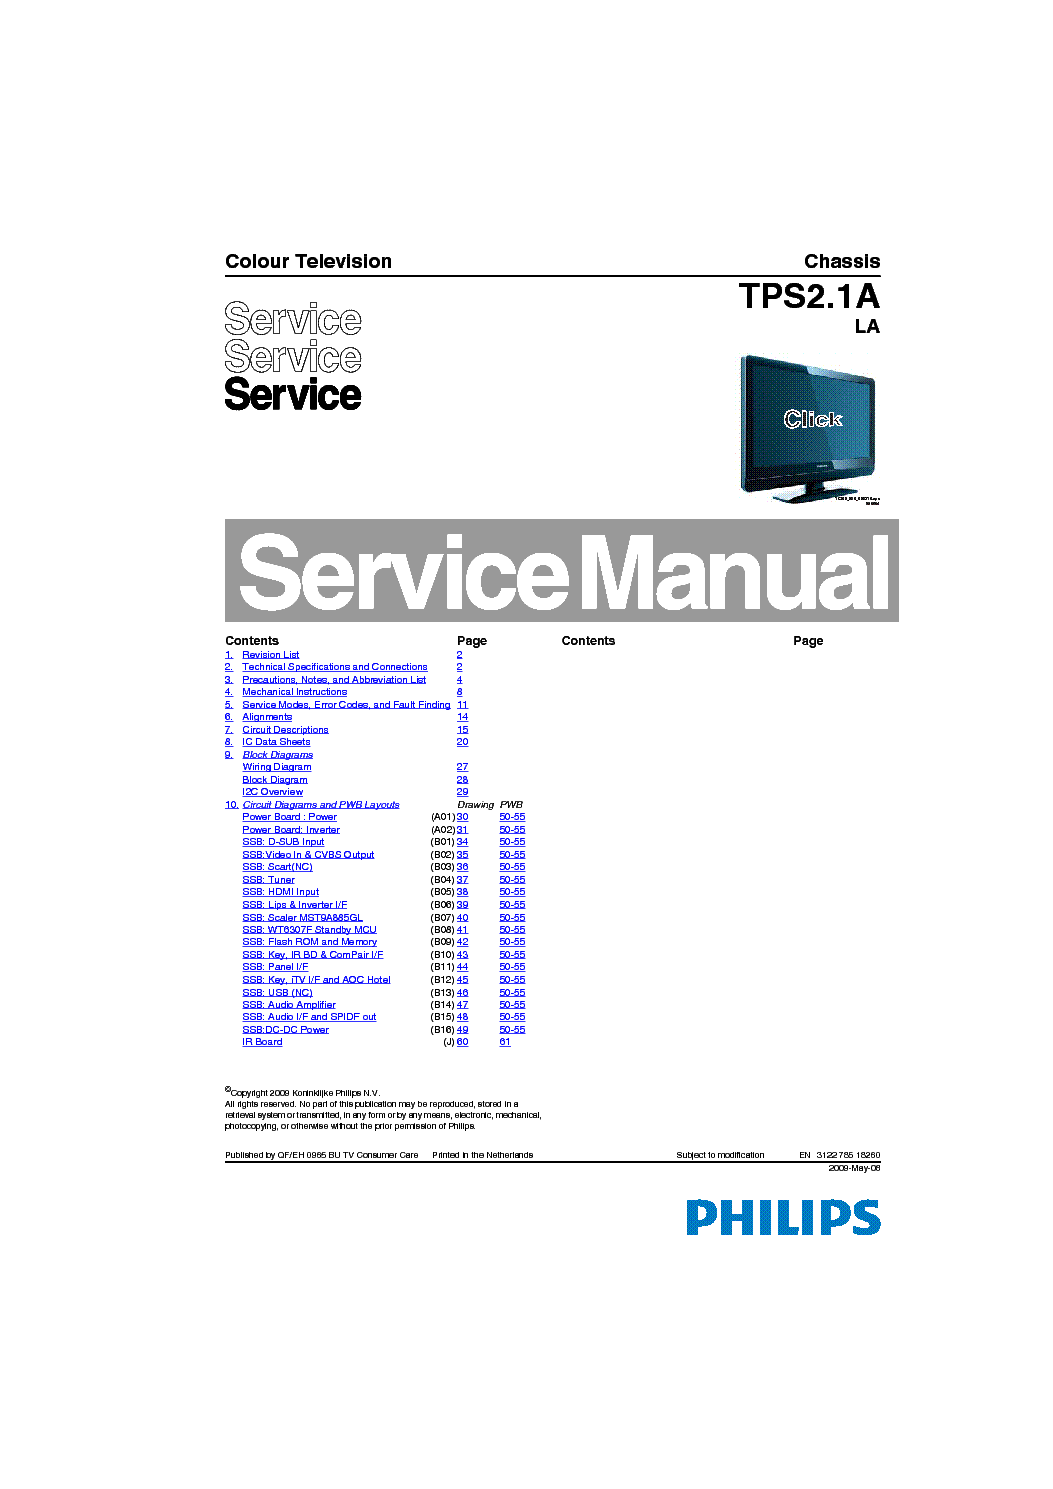 PHILIPS TPS2.1A-LA CHASSIS SM service manual (1st page)